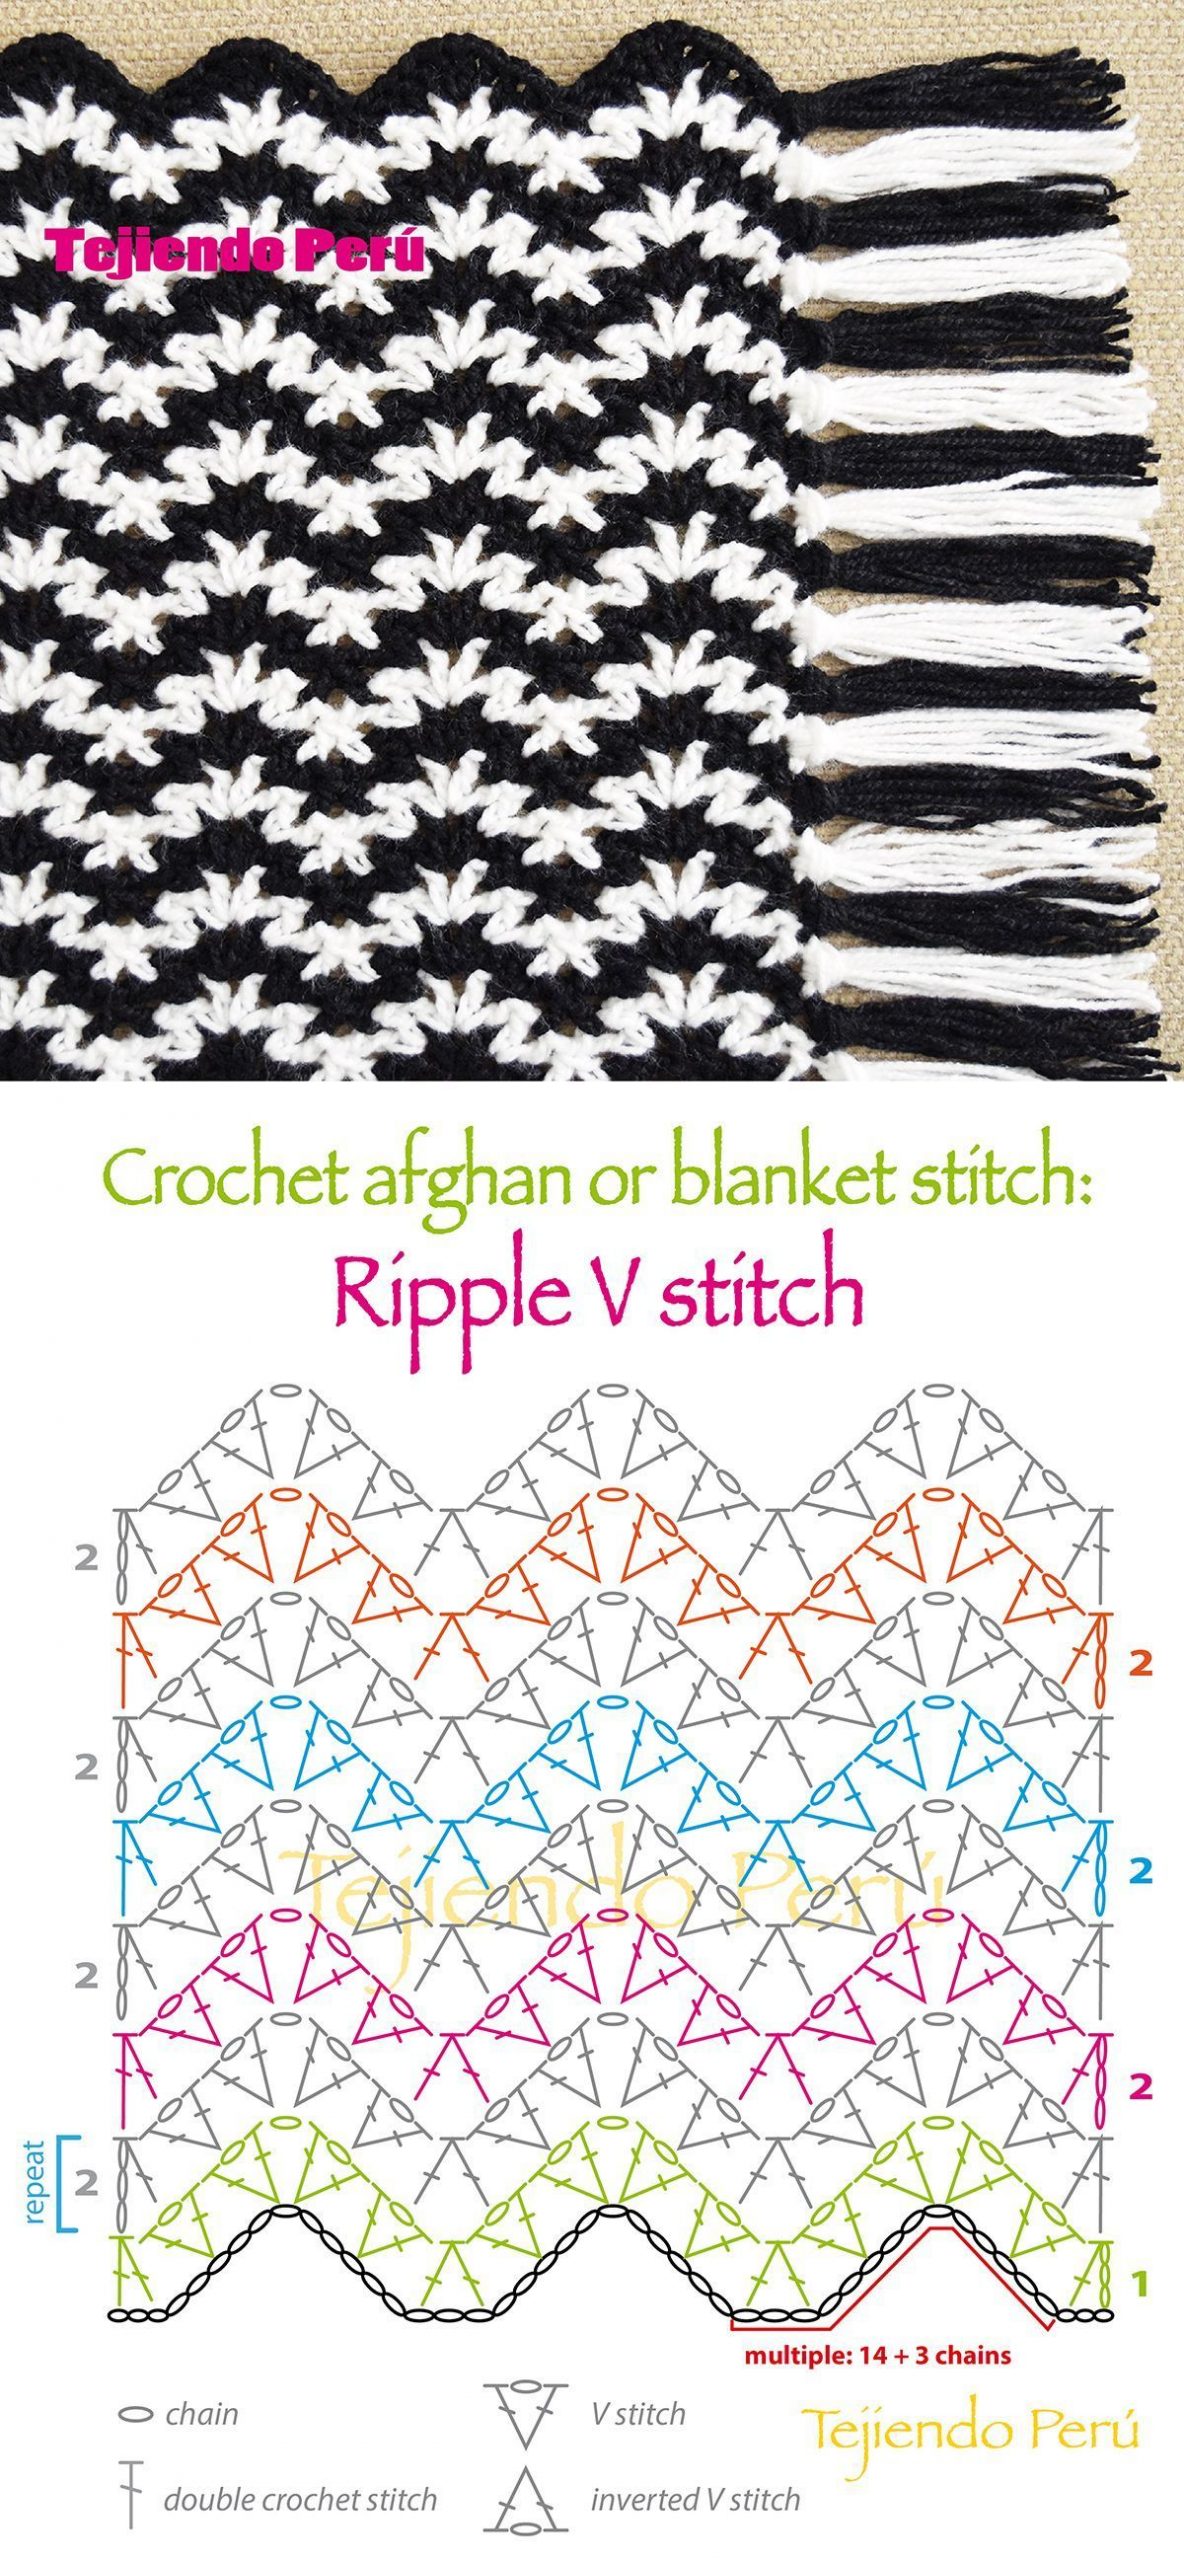 Newest No Cost Crocheting Stitches ripple Tips Crochet write-up stitches, the pl...